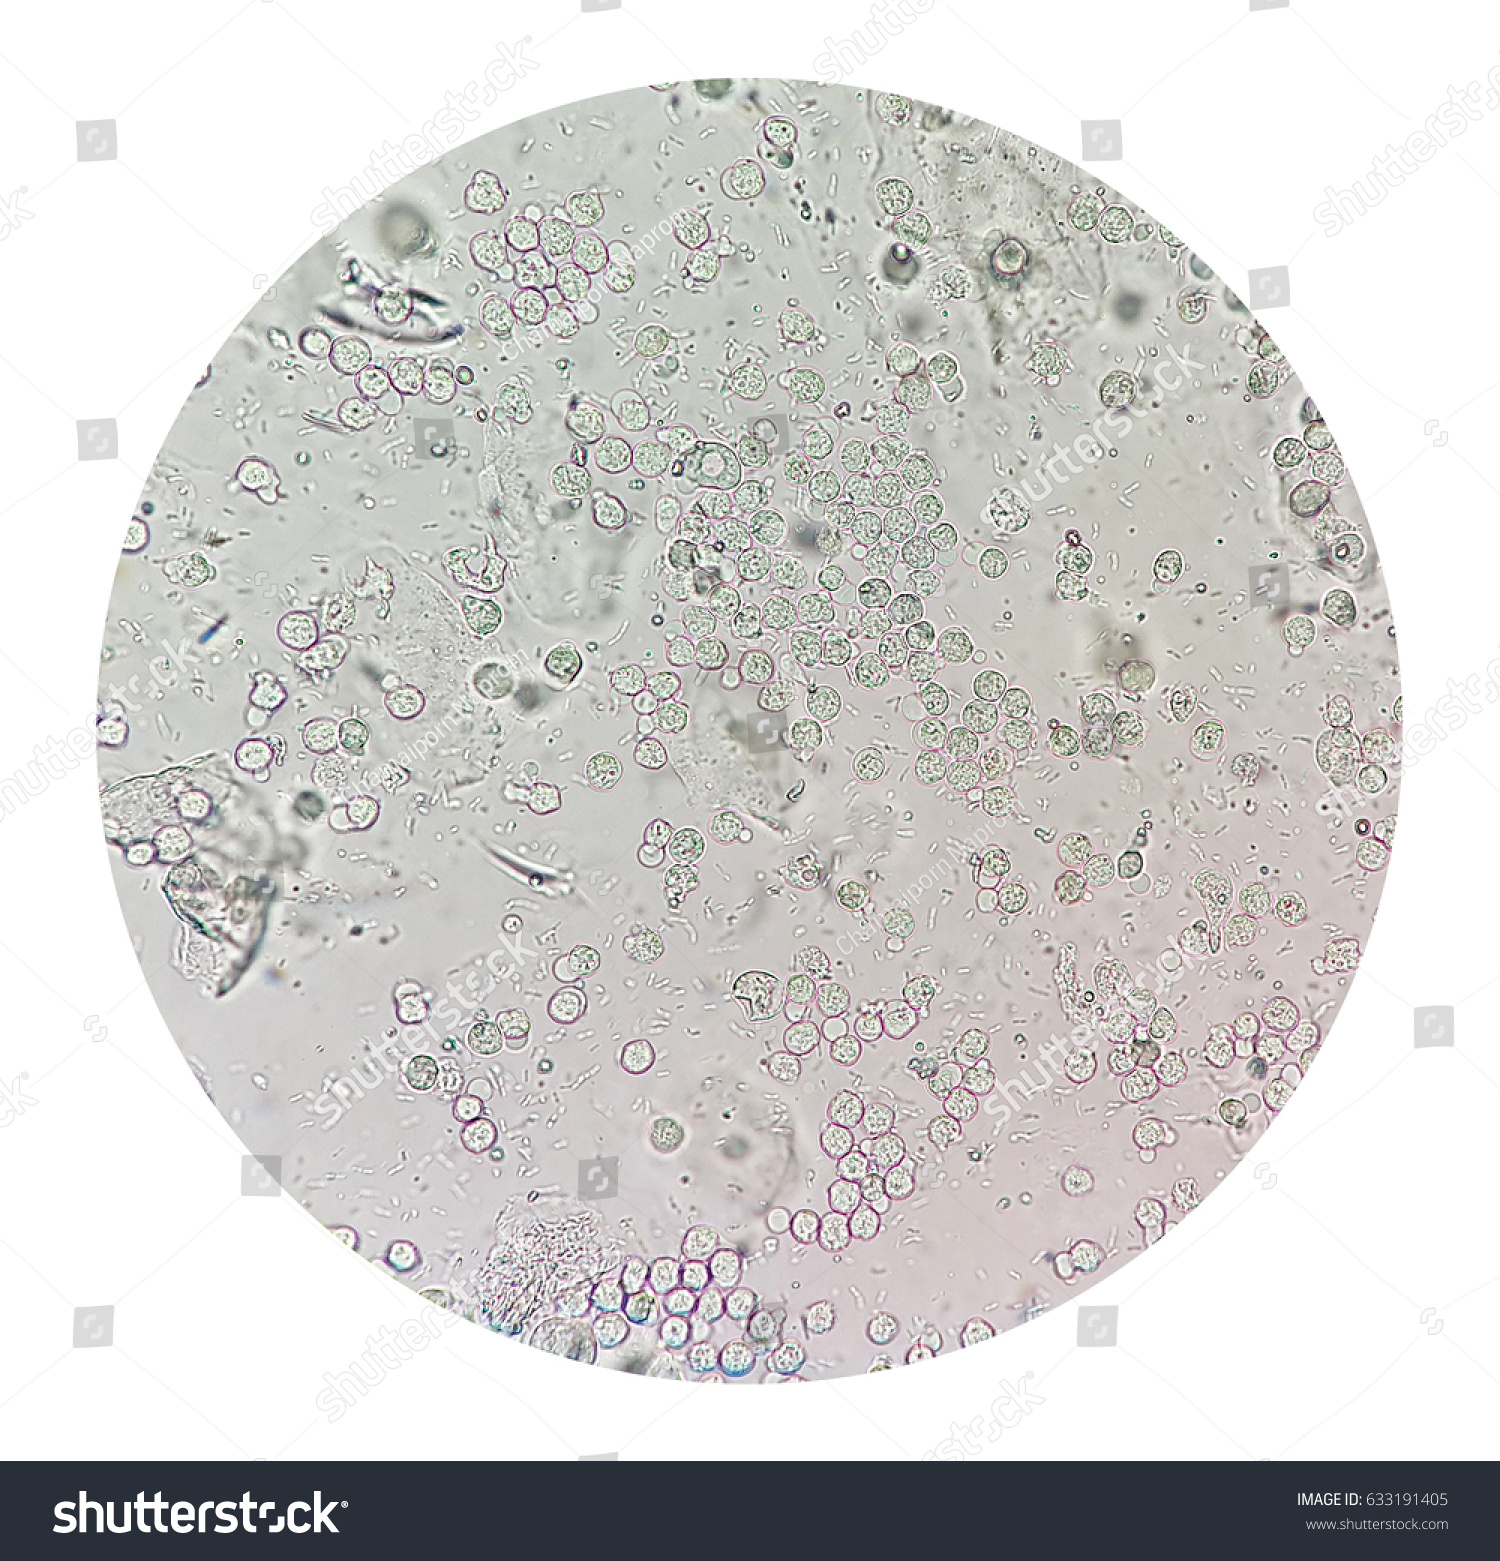 Wbc In Urine With Bacteria 7773